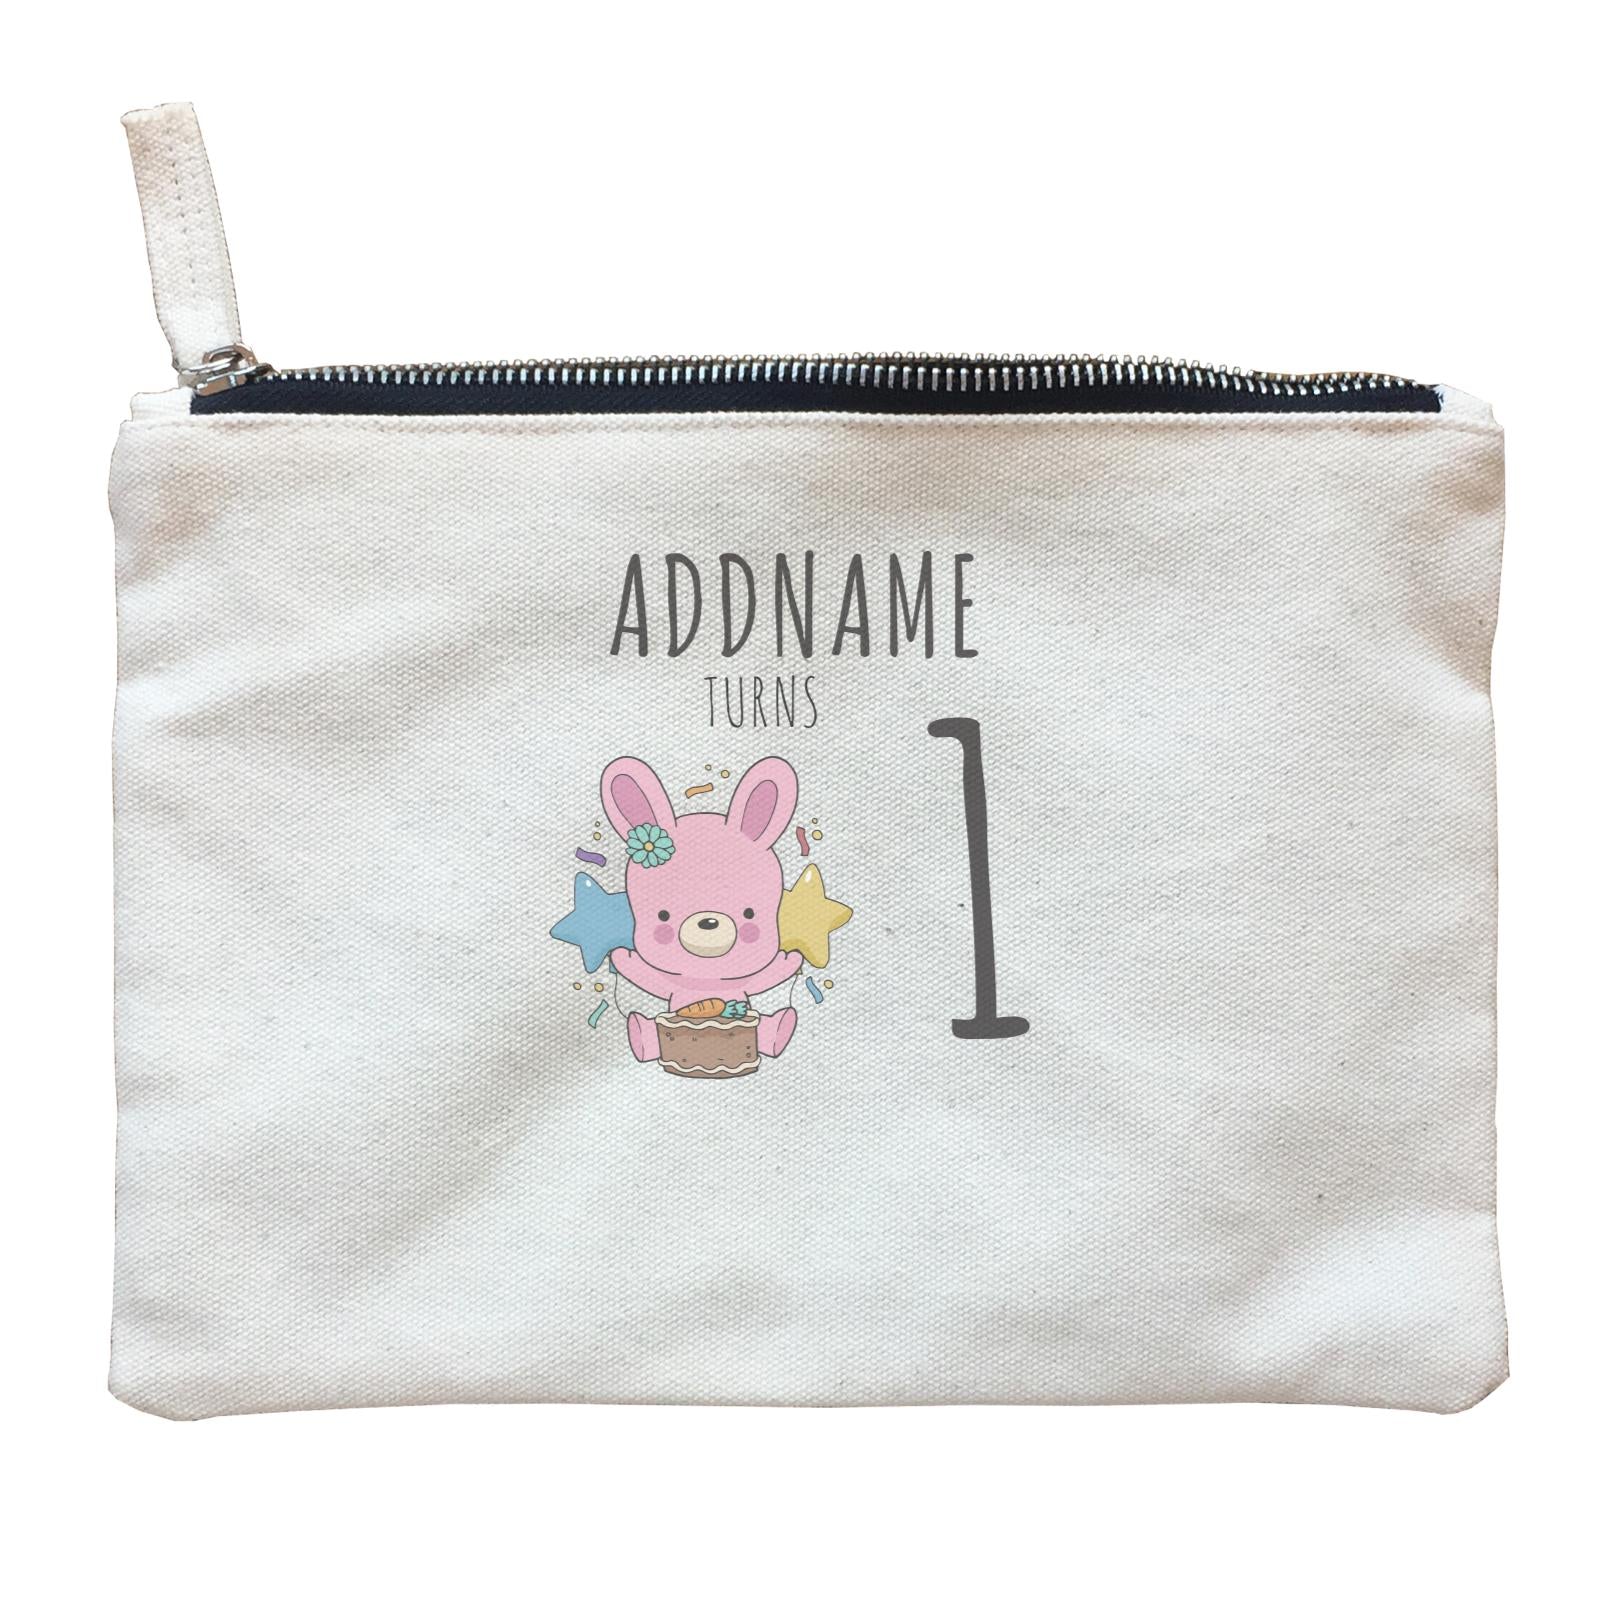 Birthday Sketch Animals Rabbit With Carrot Cake Addname Turns 1 Zipper Pouch